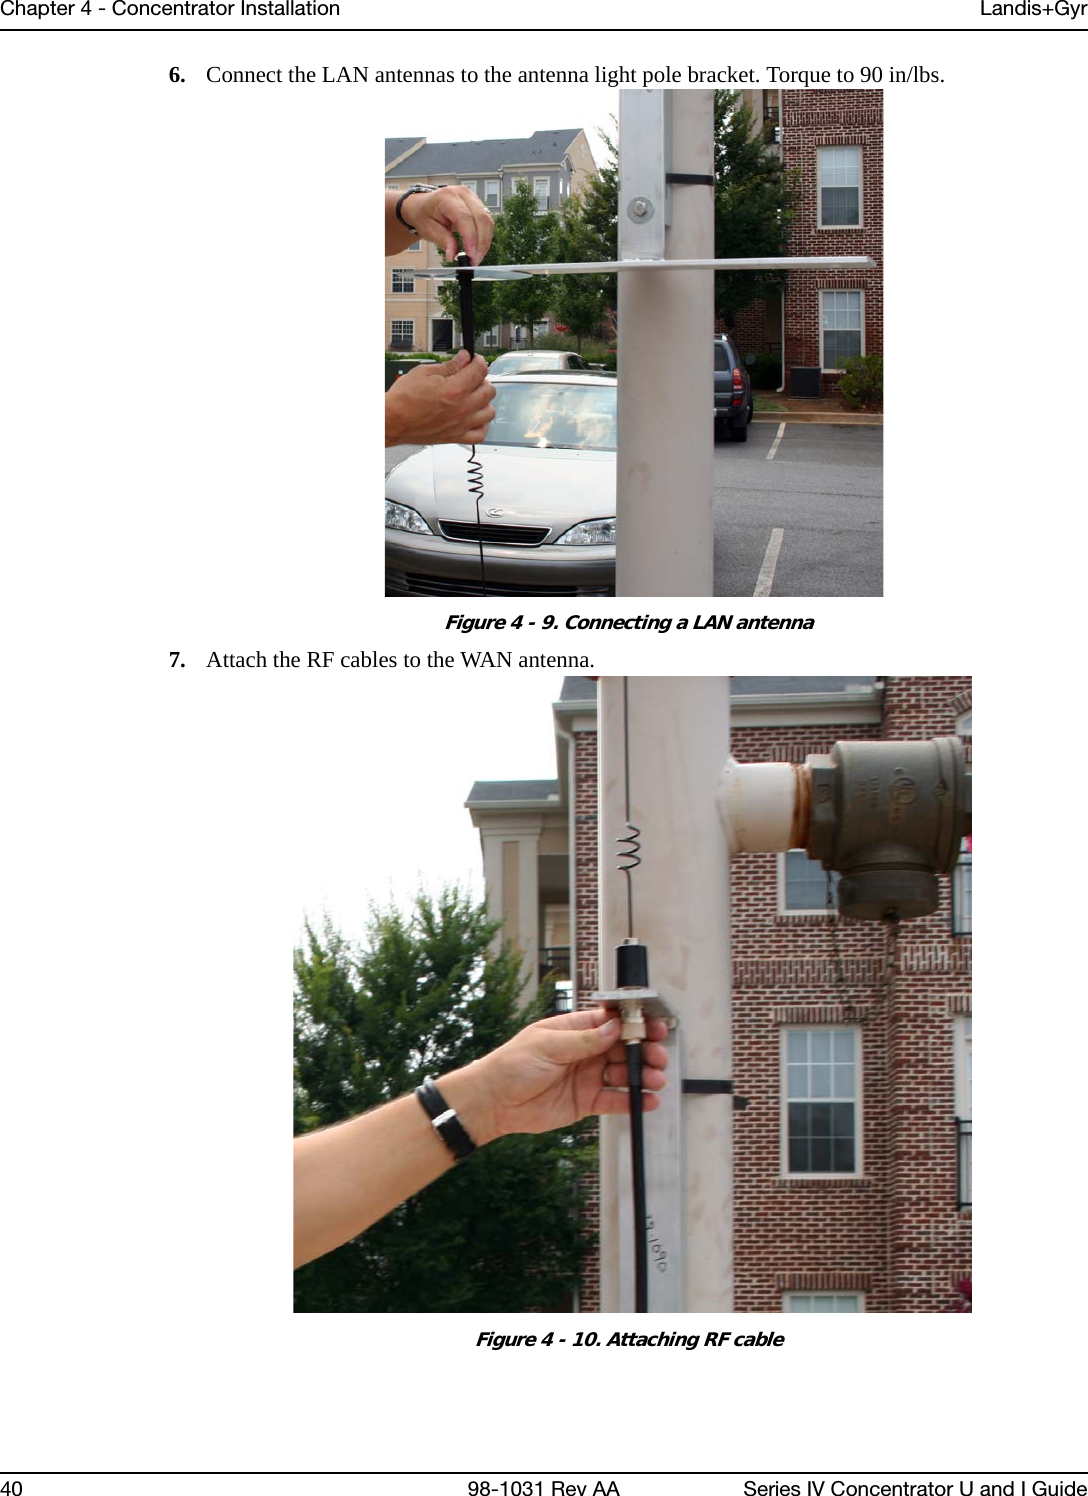 Chapter 4 - Concentrator Installation Landis+Gyr40 98-1031 Rev AA Series IV Concentrator U and I Guide6. Connect the LAN antennas to the antenna light pole bracket. Torque to 90 in/lbs.Figure 4 - 9. Connecting a LAN antenna7. Attach the RF cables to the WAN antenna.Figure 4 - 10. Attaching RF cable